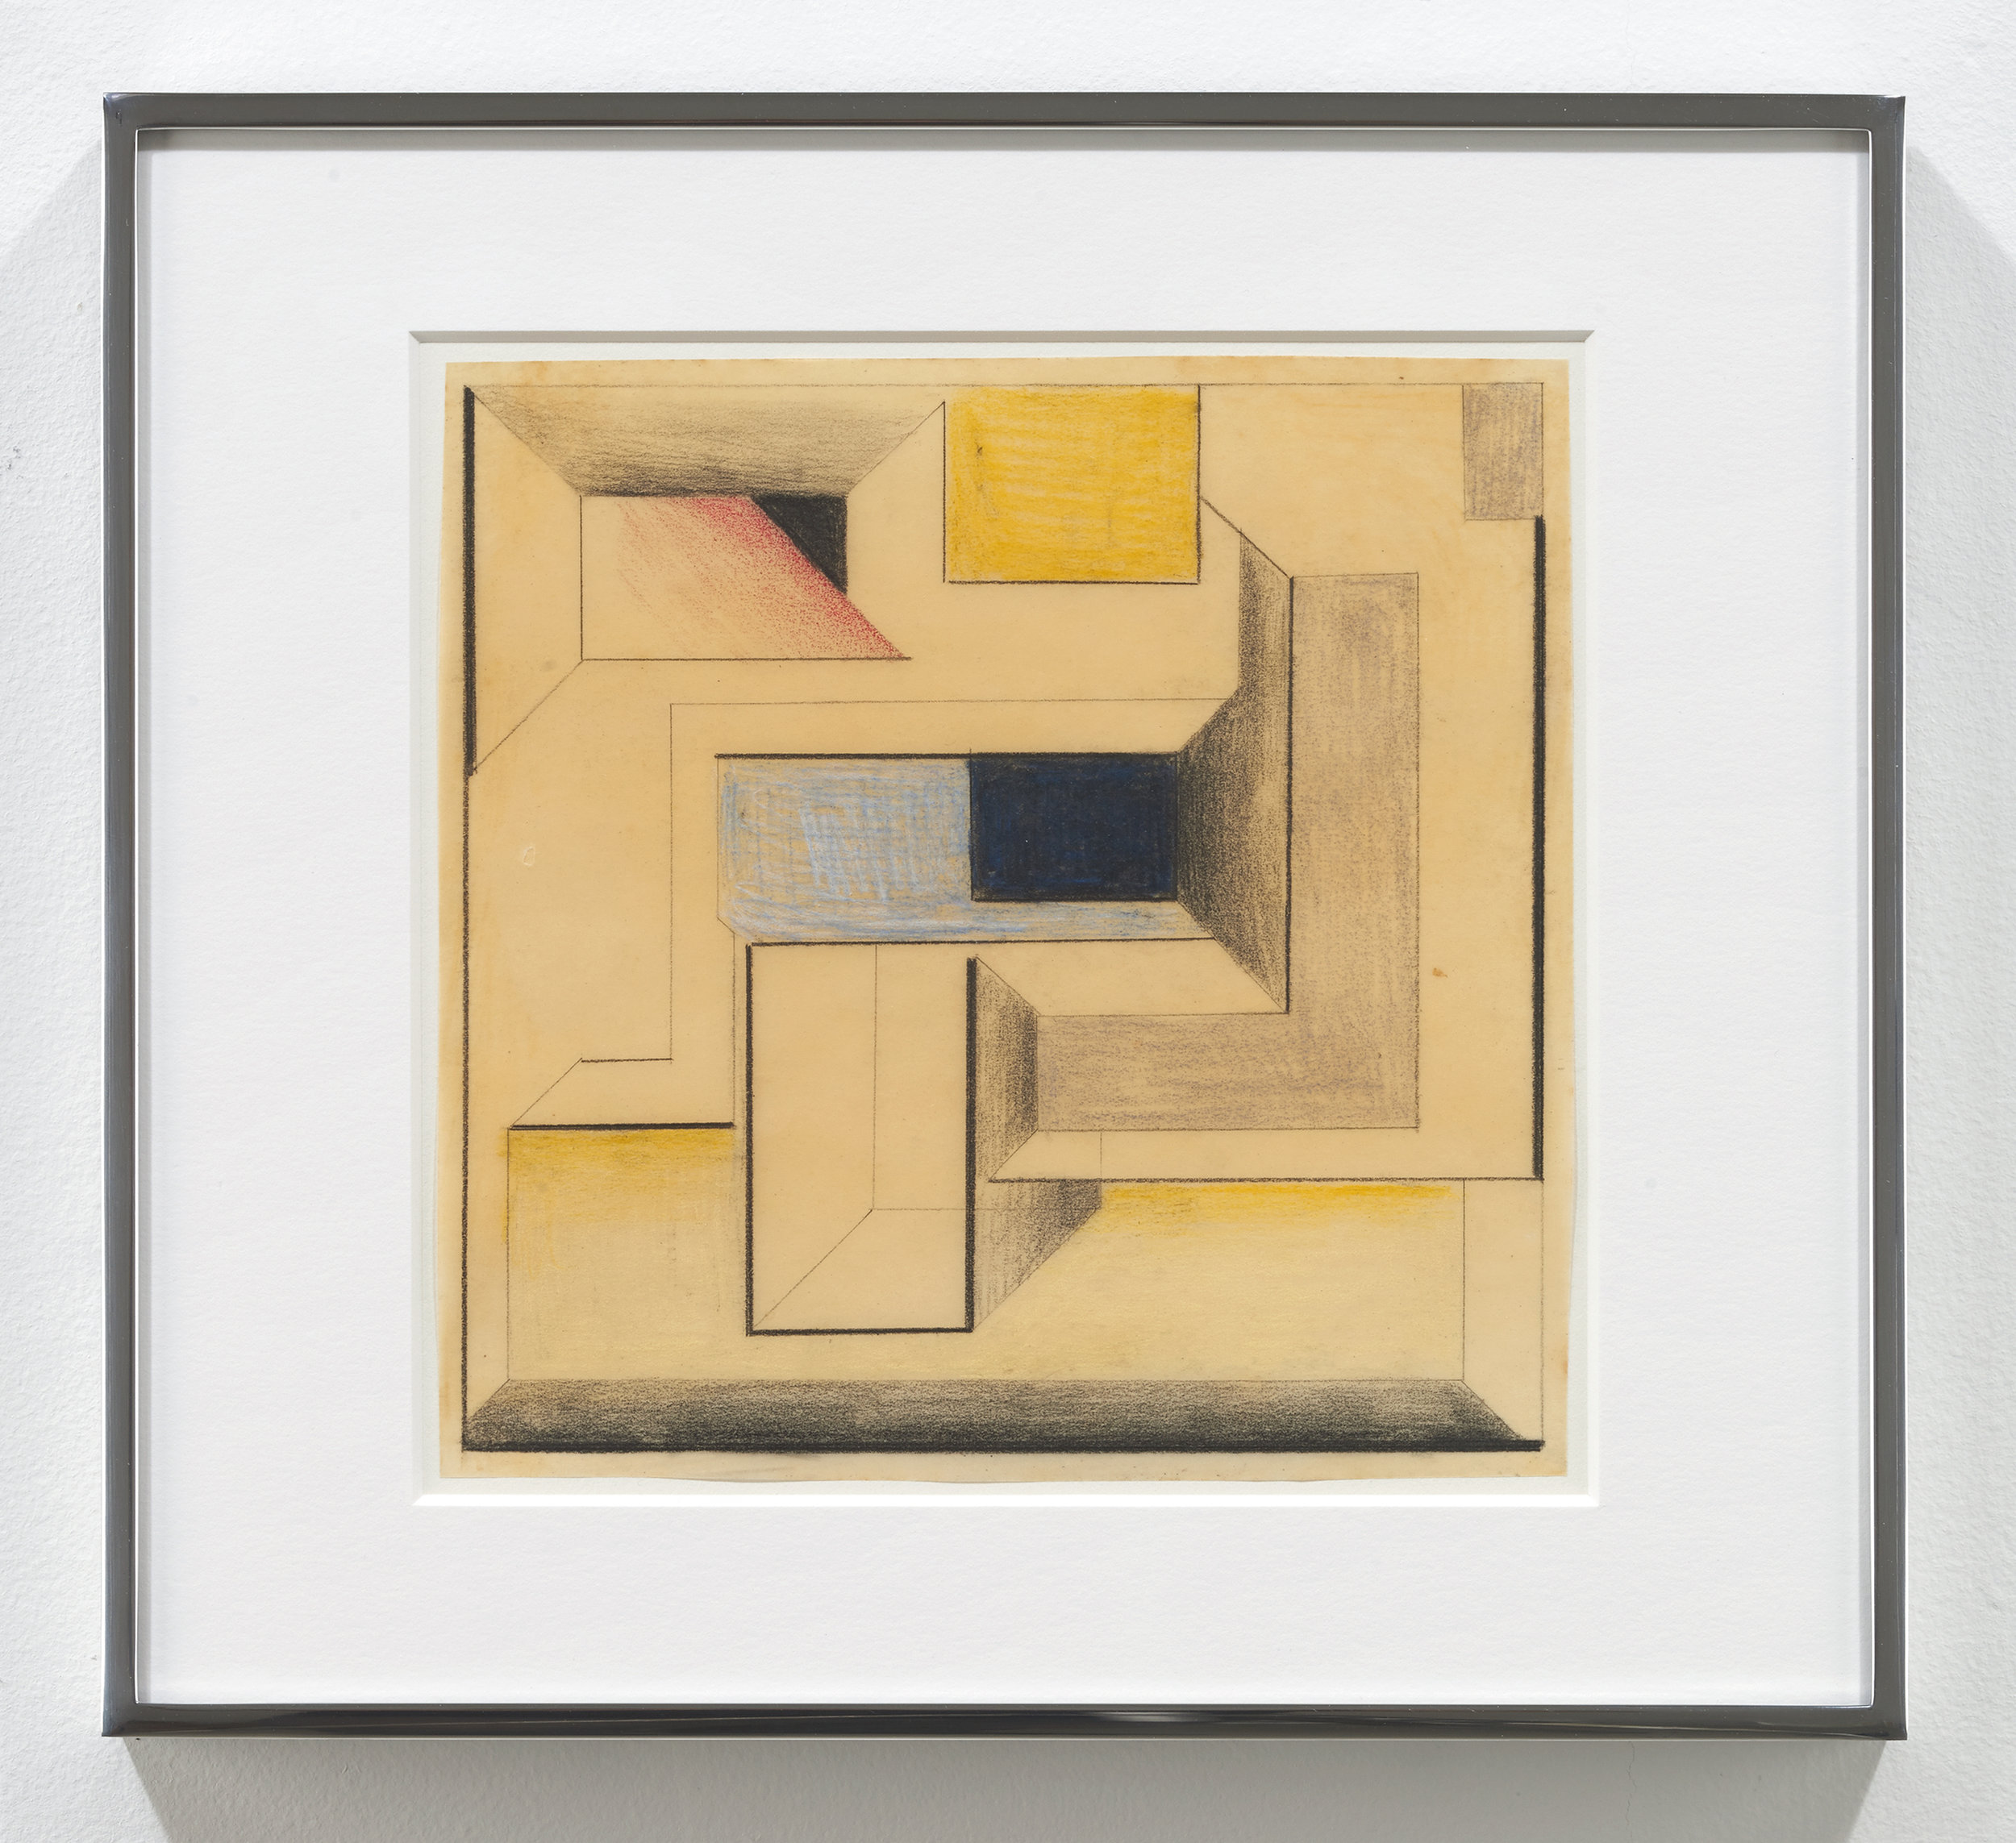  Suzanne Blank Redstone,  Drawing for Construction #3 , 1968, Paper, tracing paper, pencil and color pencil, Framed dimensions: 10.25 x 11.25 inches 